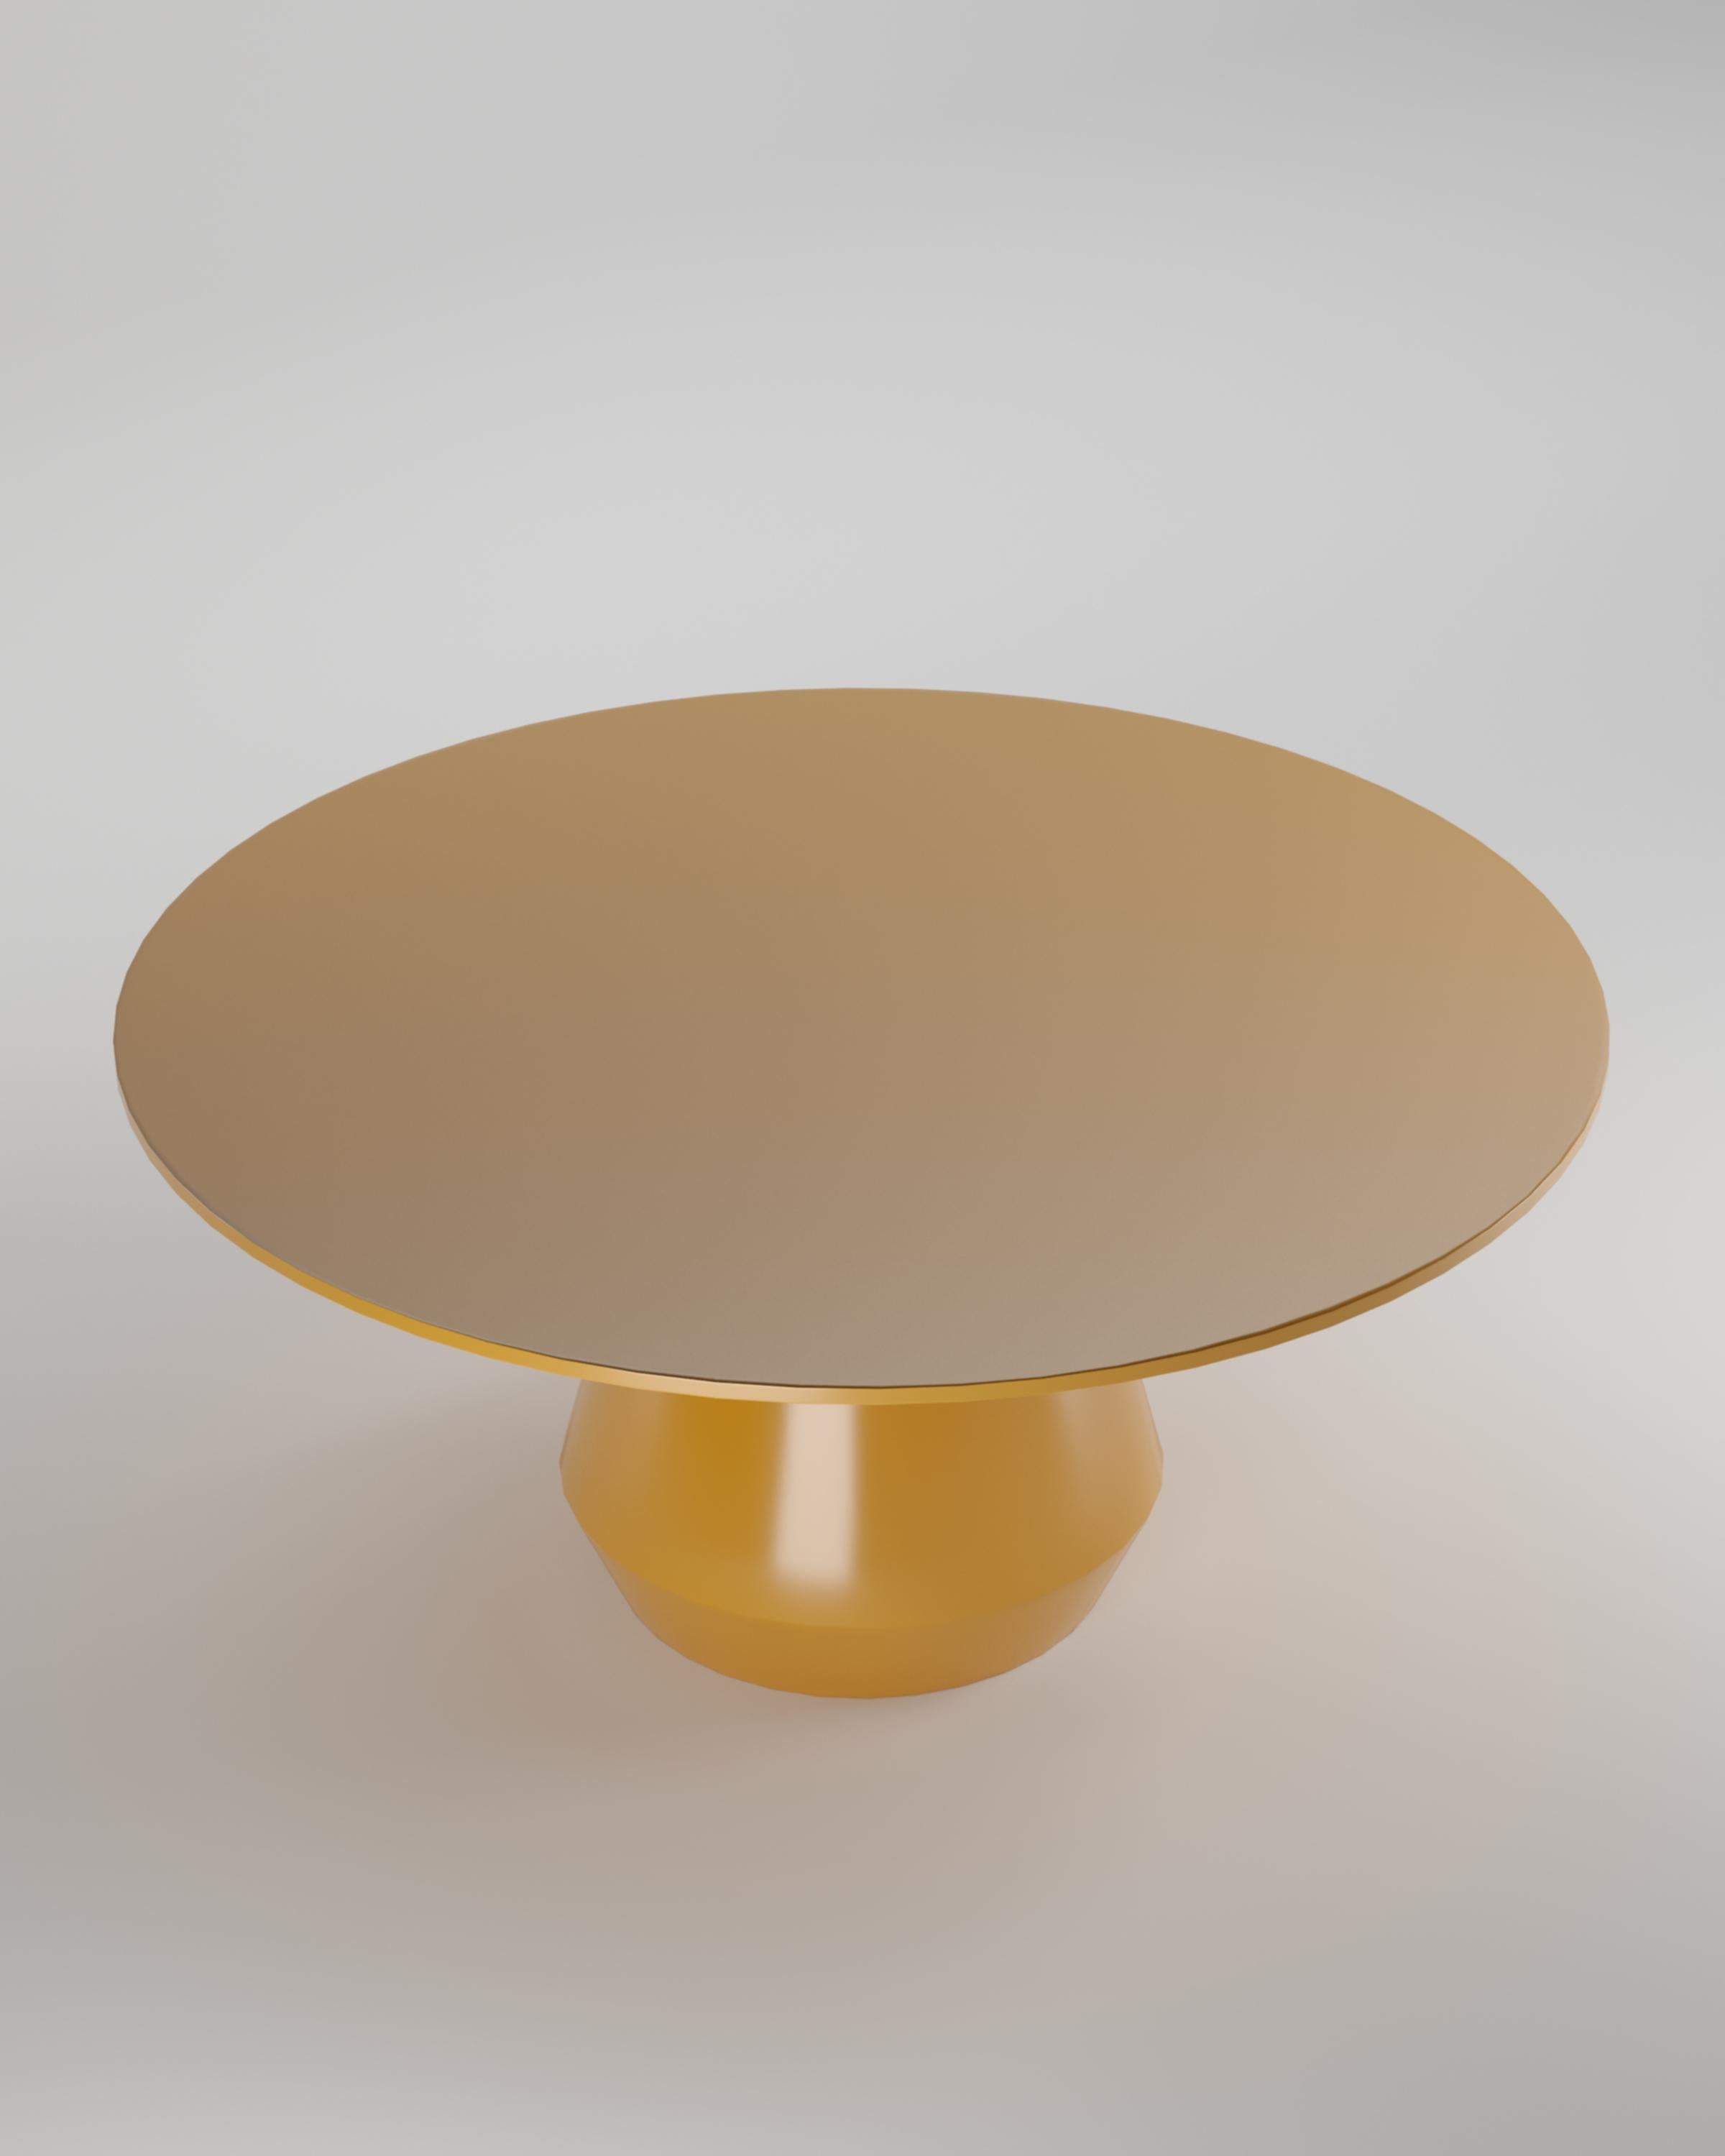 Portuguese Contemporary Modern Charlotte Dining Table in Lacquer in Yellow by Collector For Sale